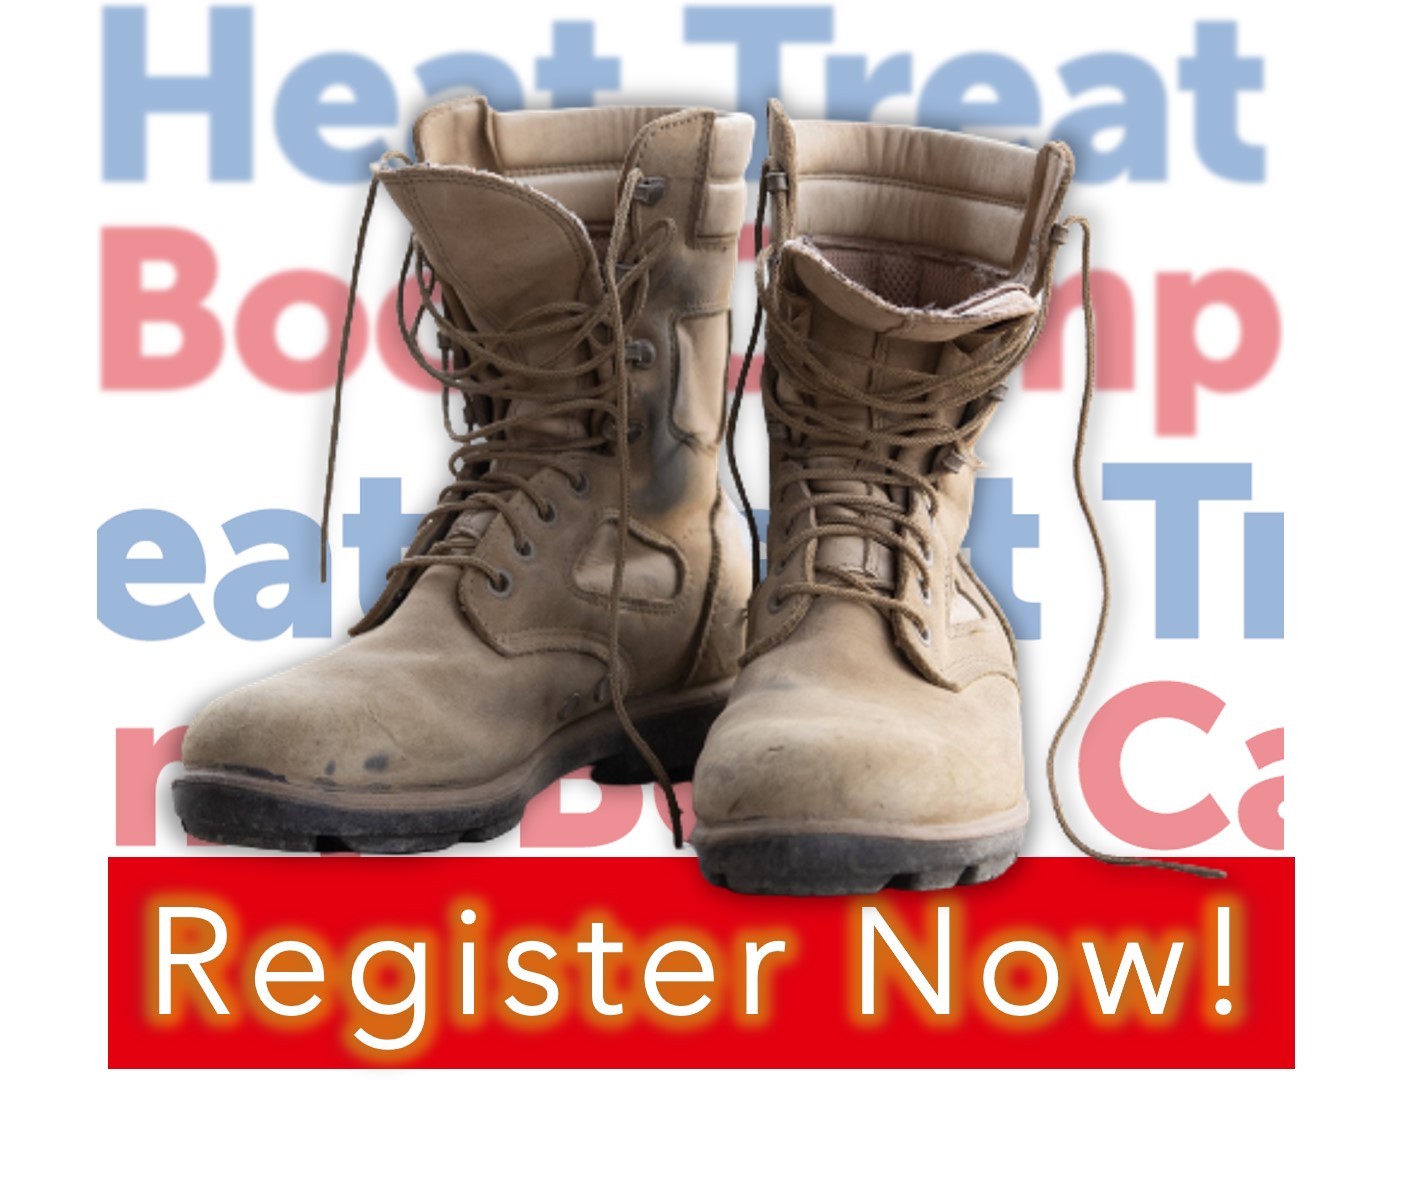 Boot Camp ad